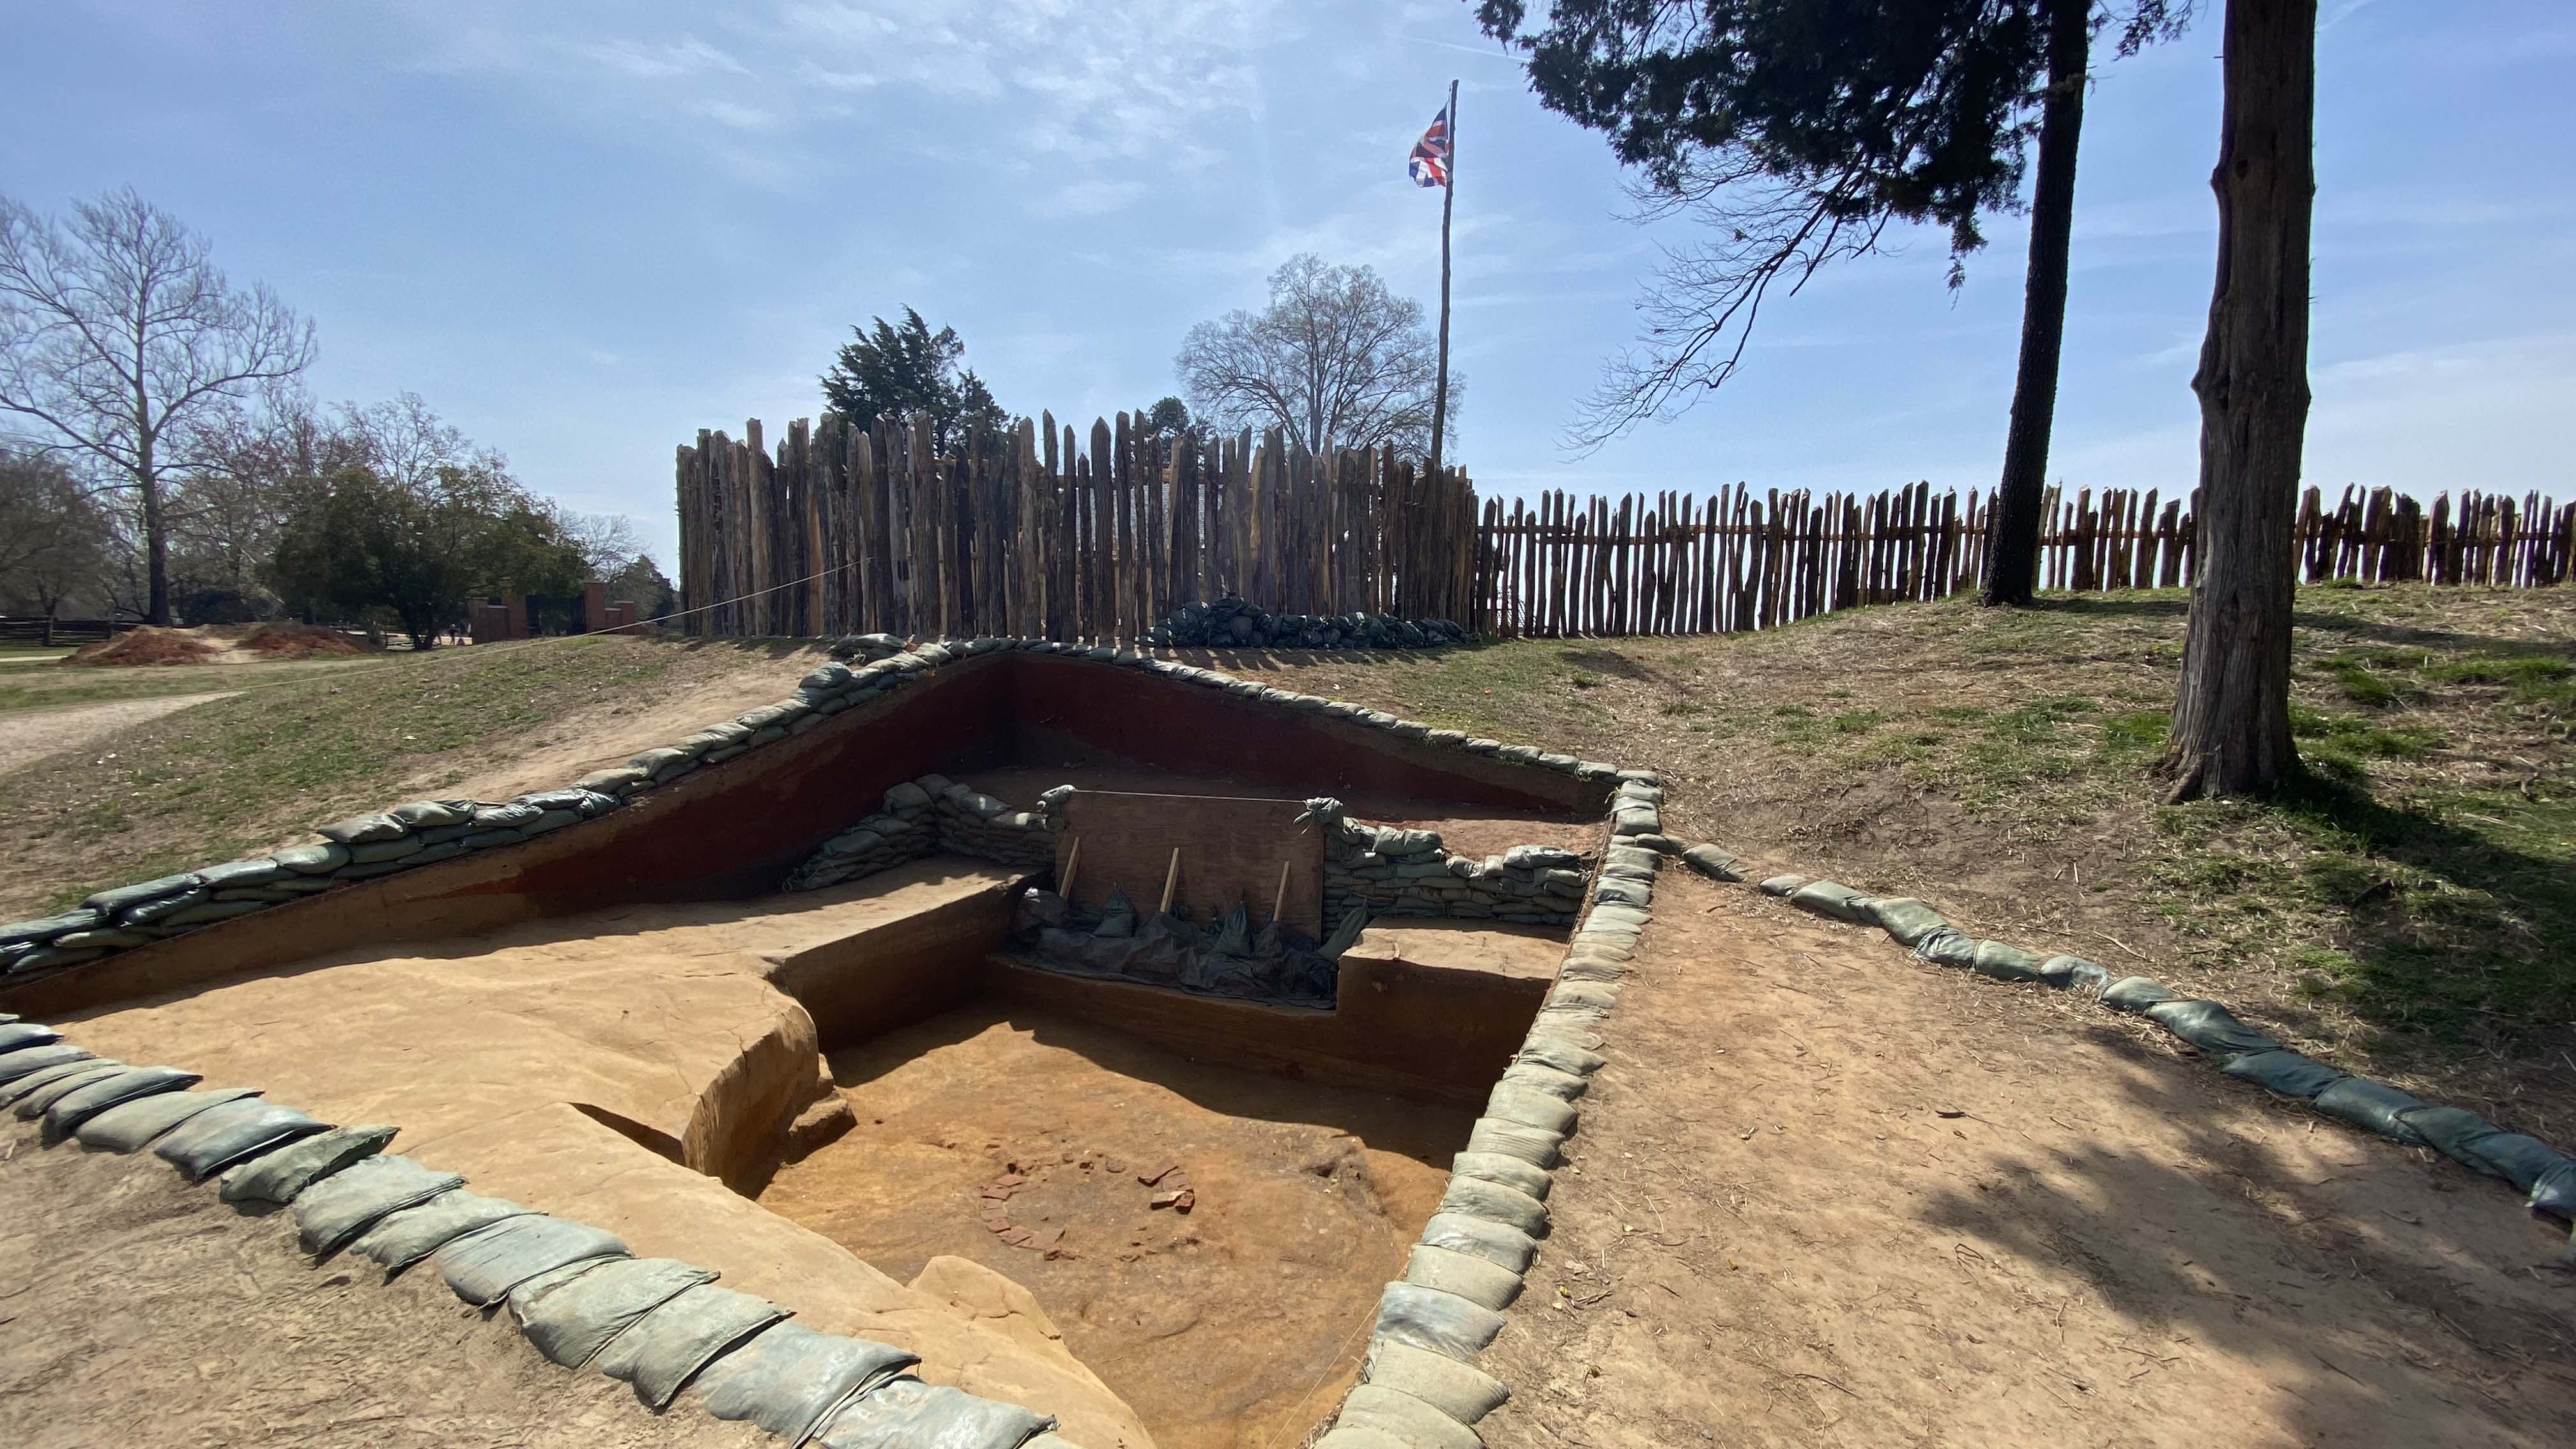 The site of an archaeological excavation right outside the historic 1607 fort at Jamestown. Officials believe it was once home to a garden. (Image: Katherine Hafner)